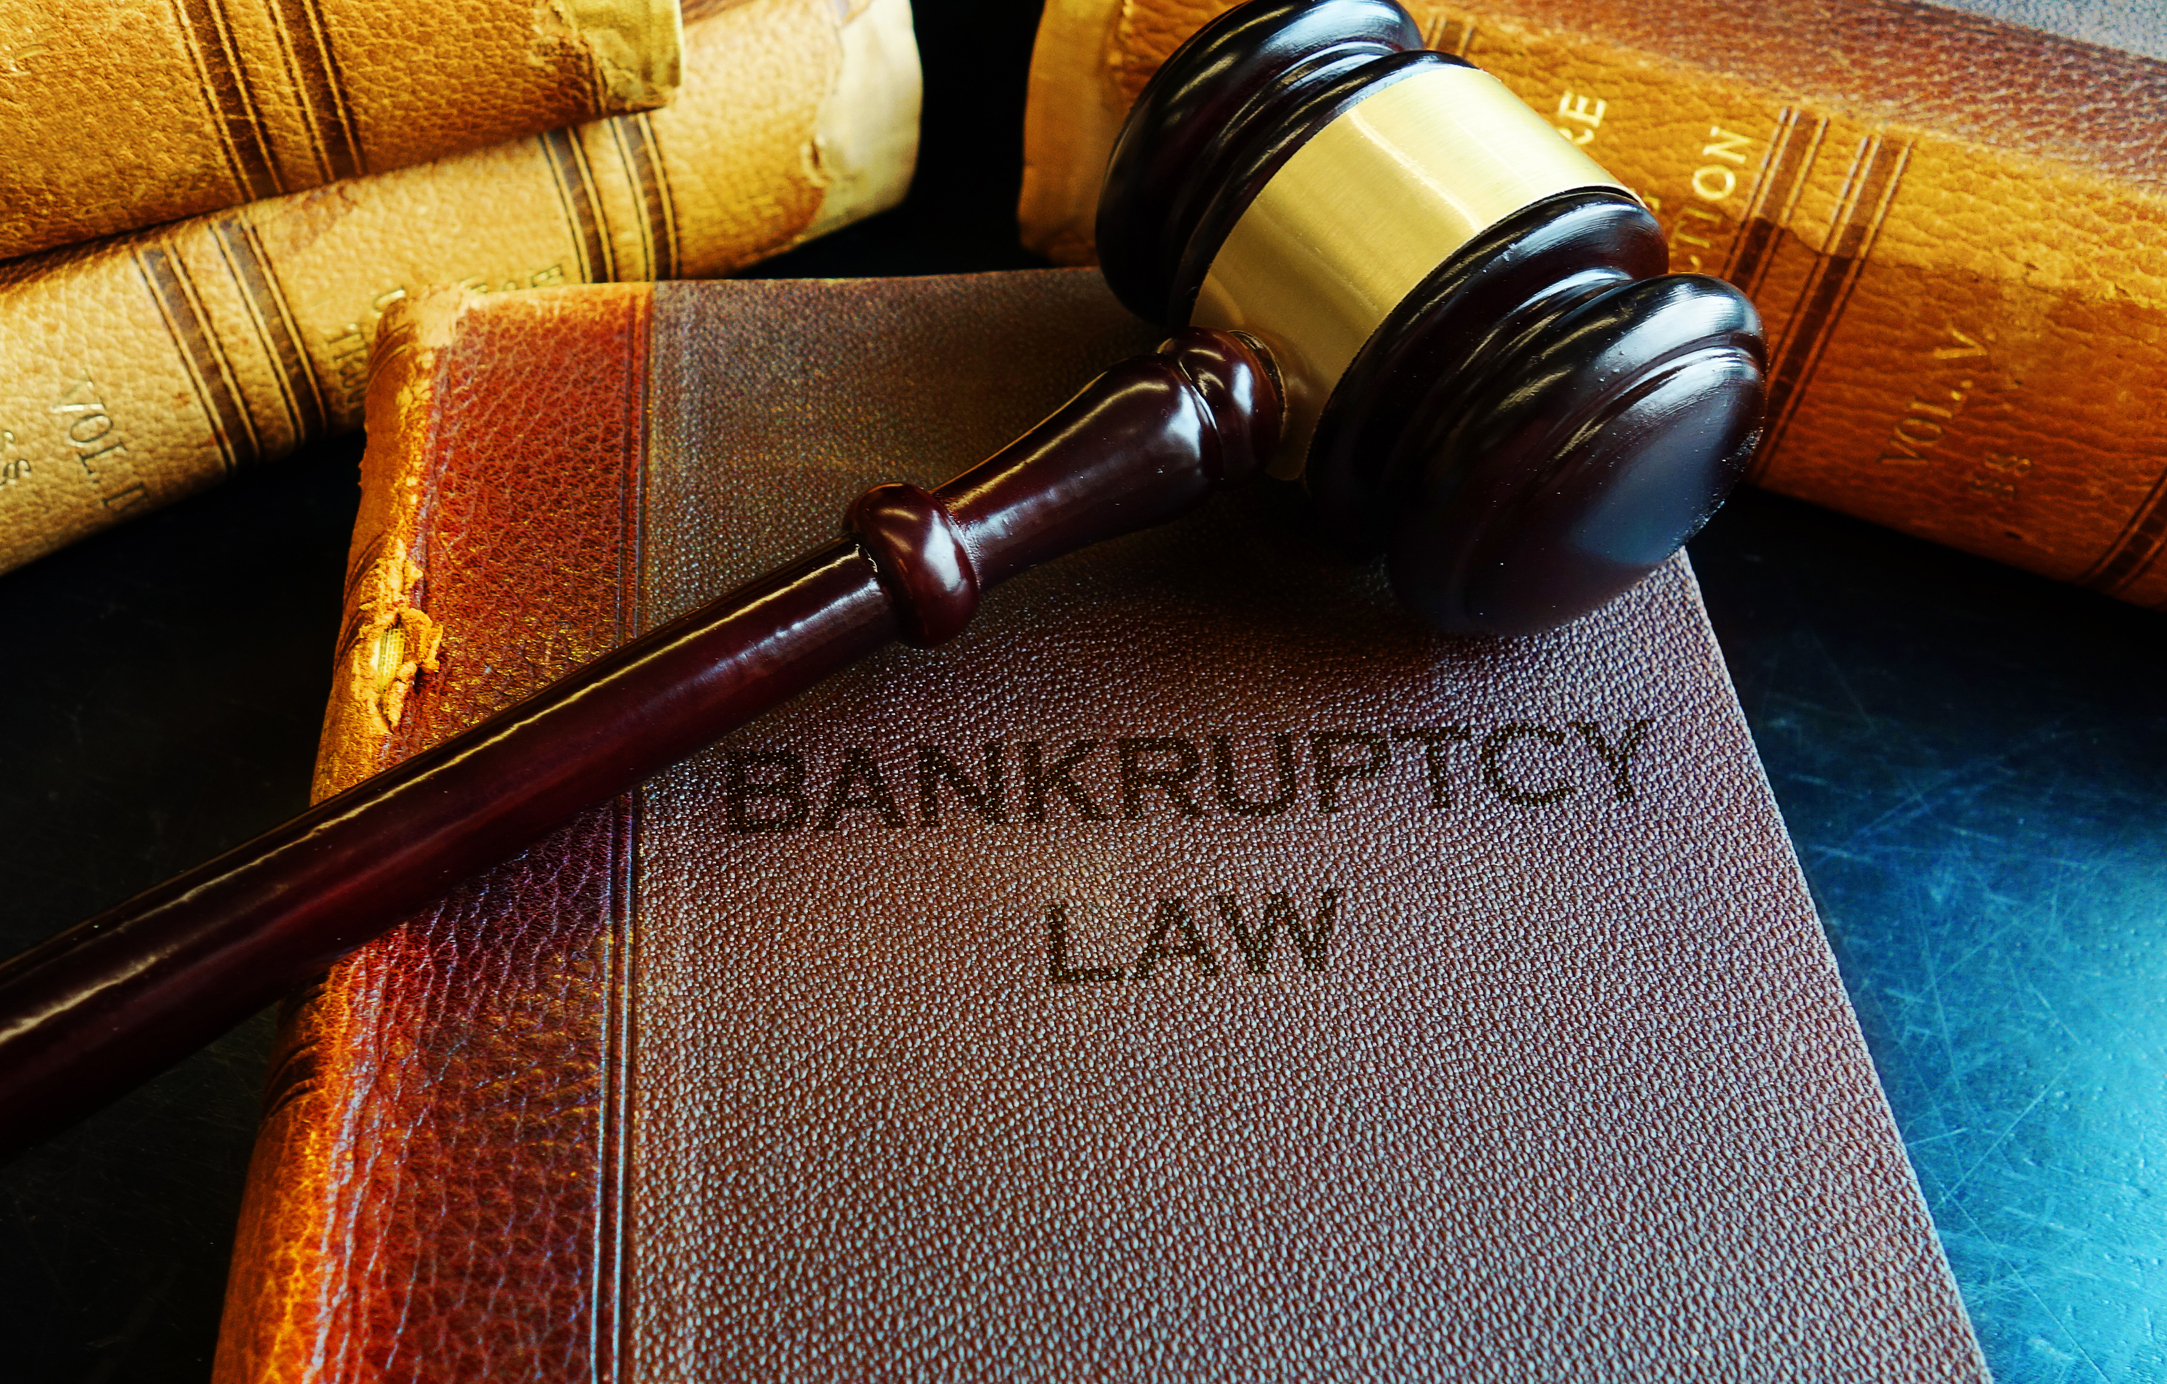 Downriver Chapter 7 bankruptcy lawyer